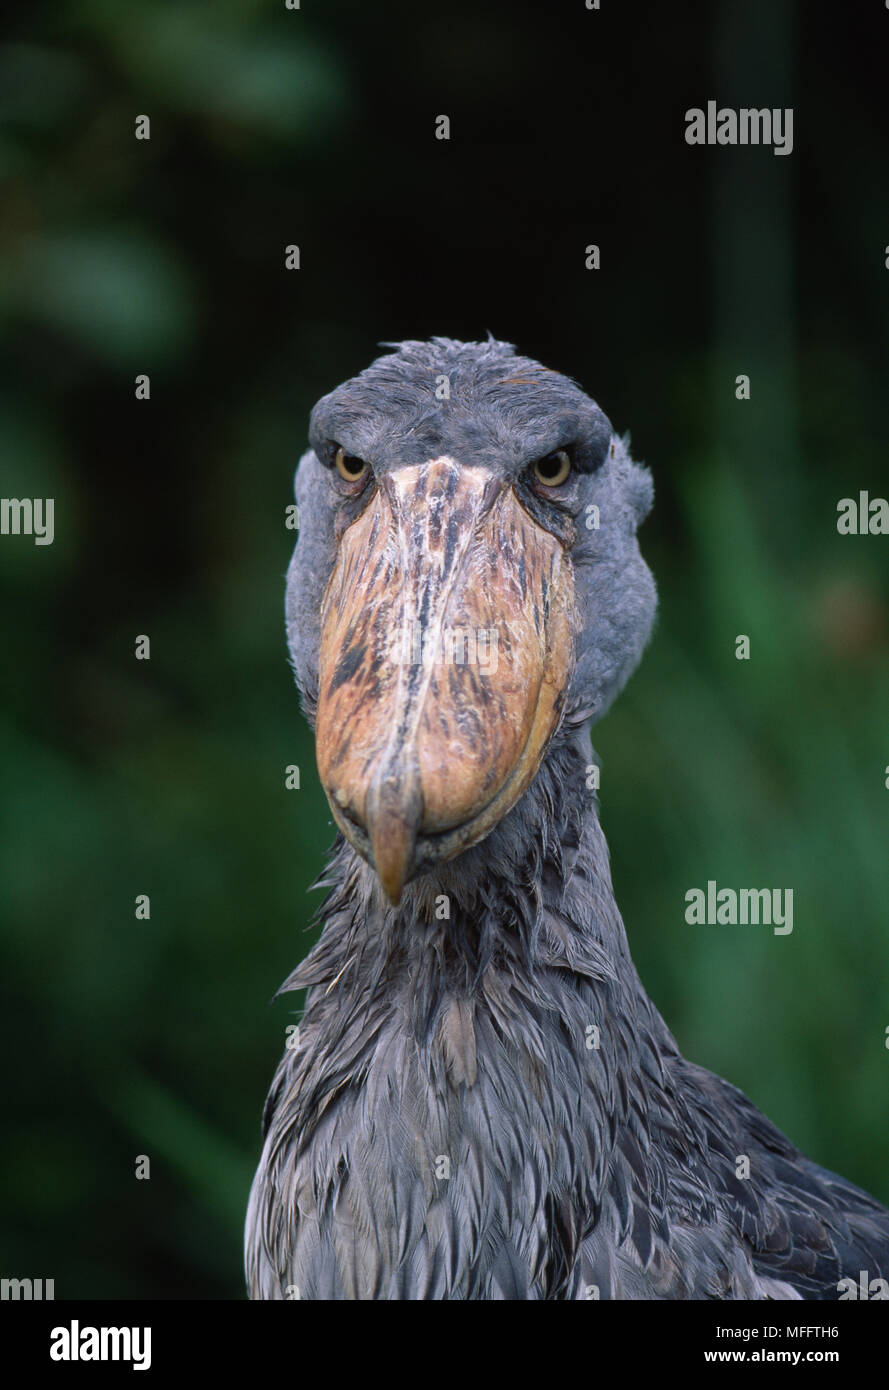 SHOEBILL STORK   face detail Balaeniceps rex      Also called Whale-headed Stork  Found widely in central Africa Stock Photo